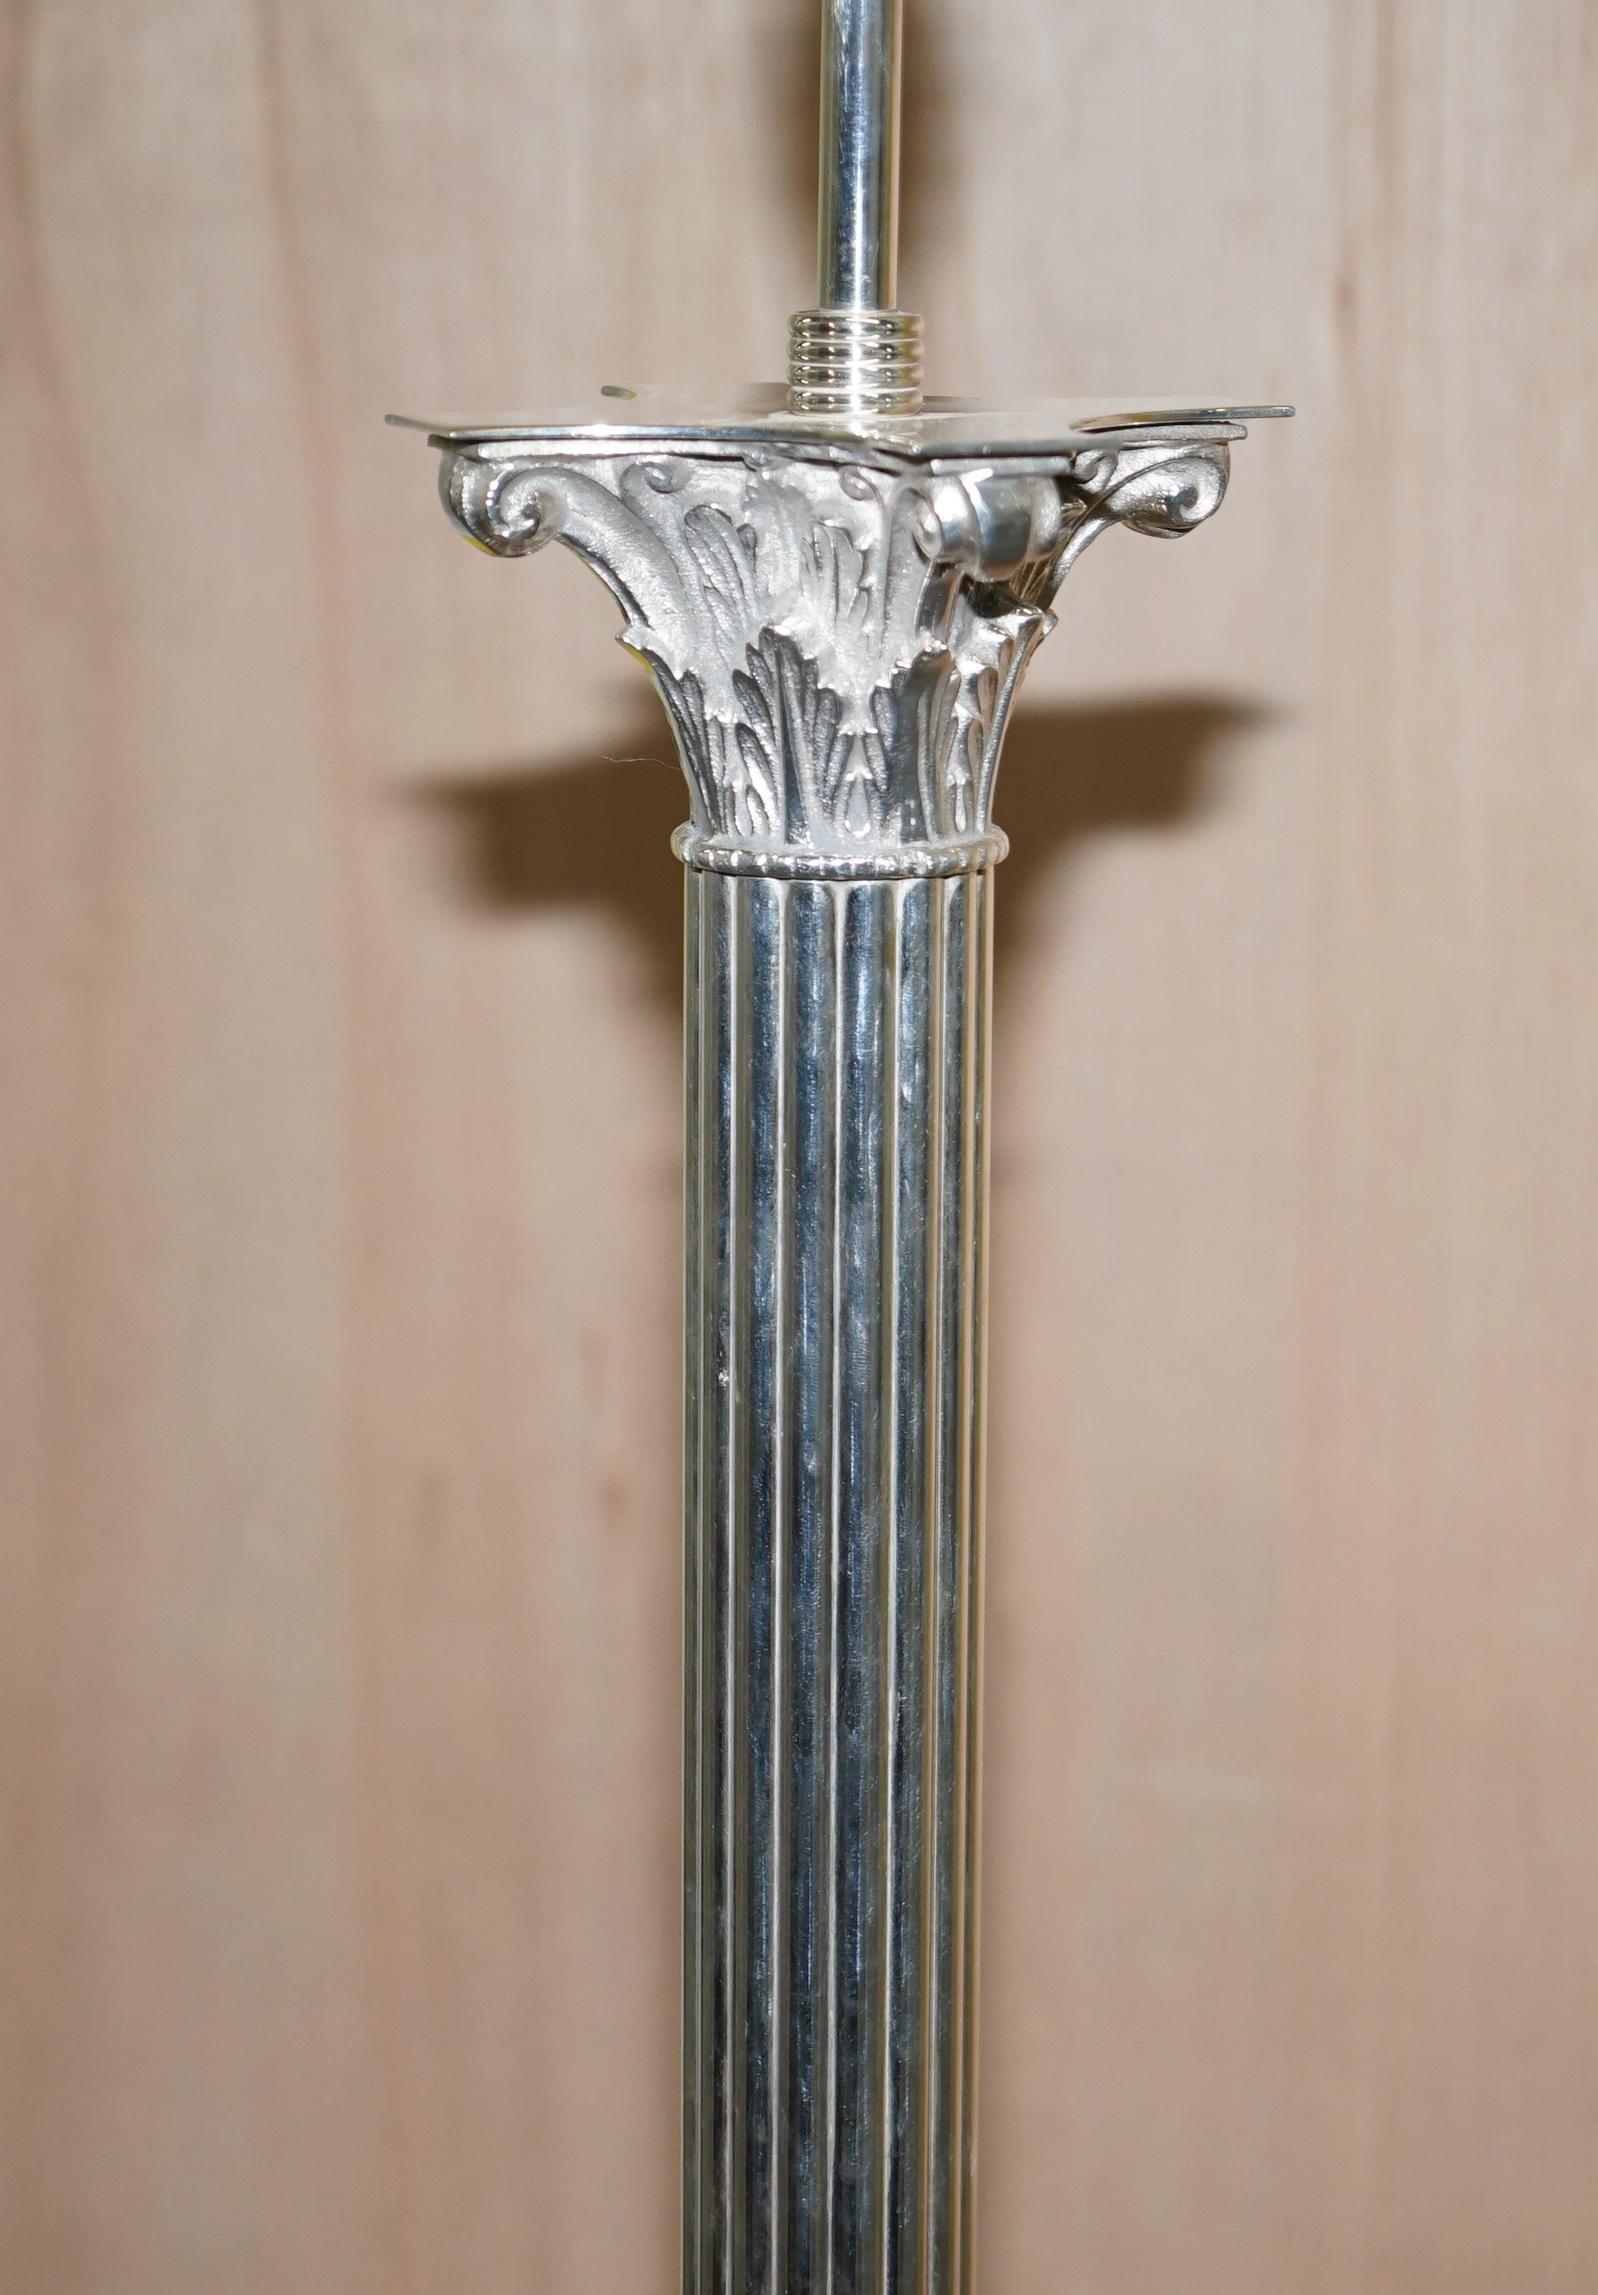 Vintage Silver Plated Corinthian Pillared Floor Standing Lamp Hairy Paw Feet For Sale 2